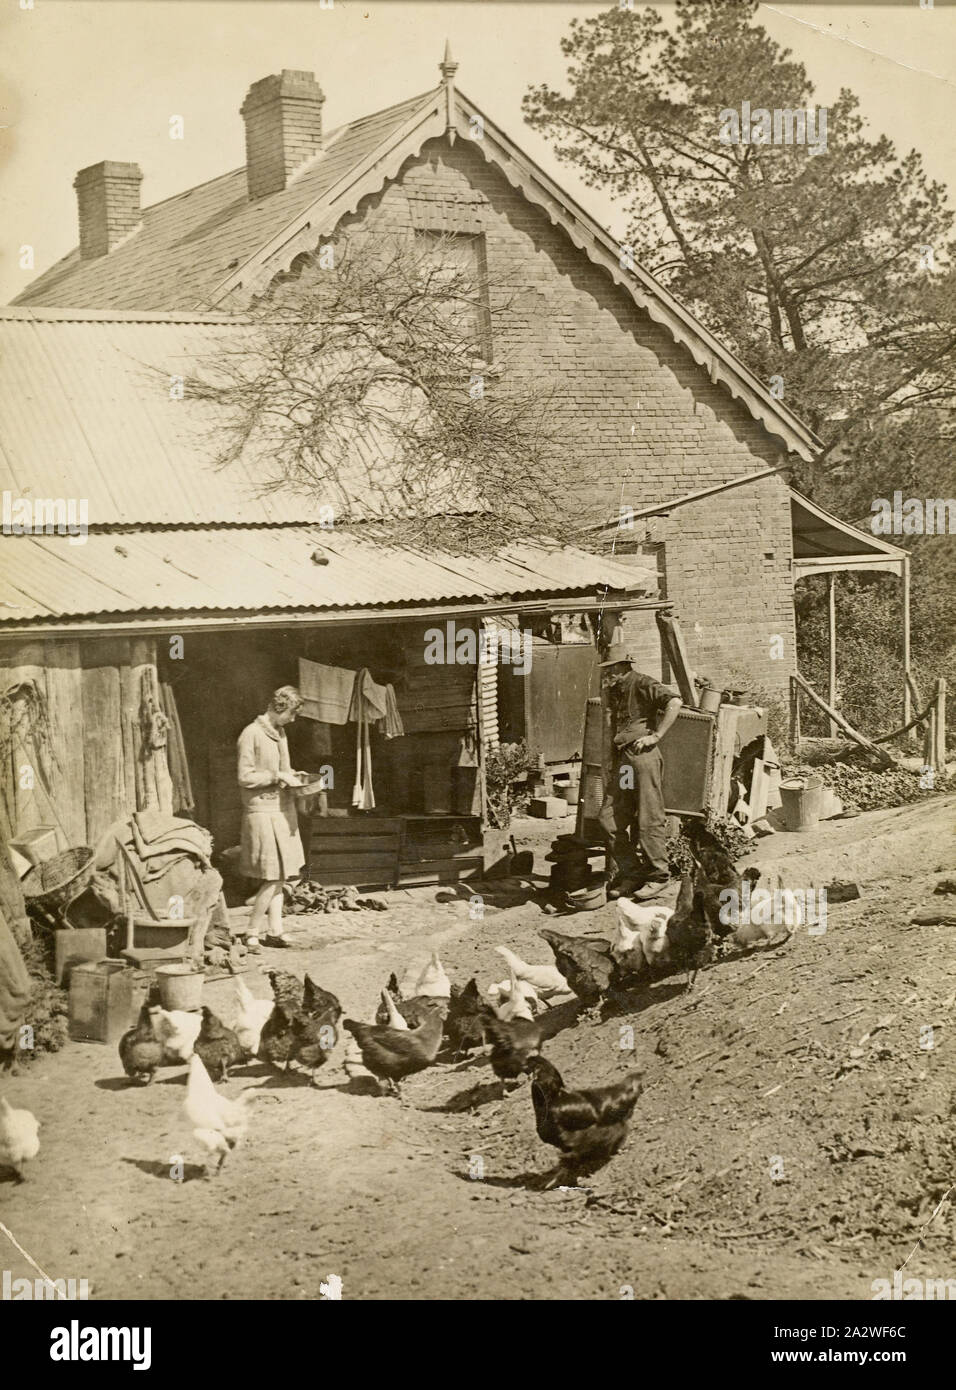 Digital Photograph - Feeding the Chooks, 'Willis Vale' Homestead, Greensborough, Victoria, circa 1920s, View at back of the old homestead on the property 'Willis Vale' during the depression. The property in Greensborough was established in 1839 and later acquired by the Partington family around the early 1870s. The property continued to function as a working farm up to this point and the orchard established by Robert Whatmough on the property in the 1870s and 1880s was still there, although Stock Photo